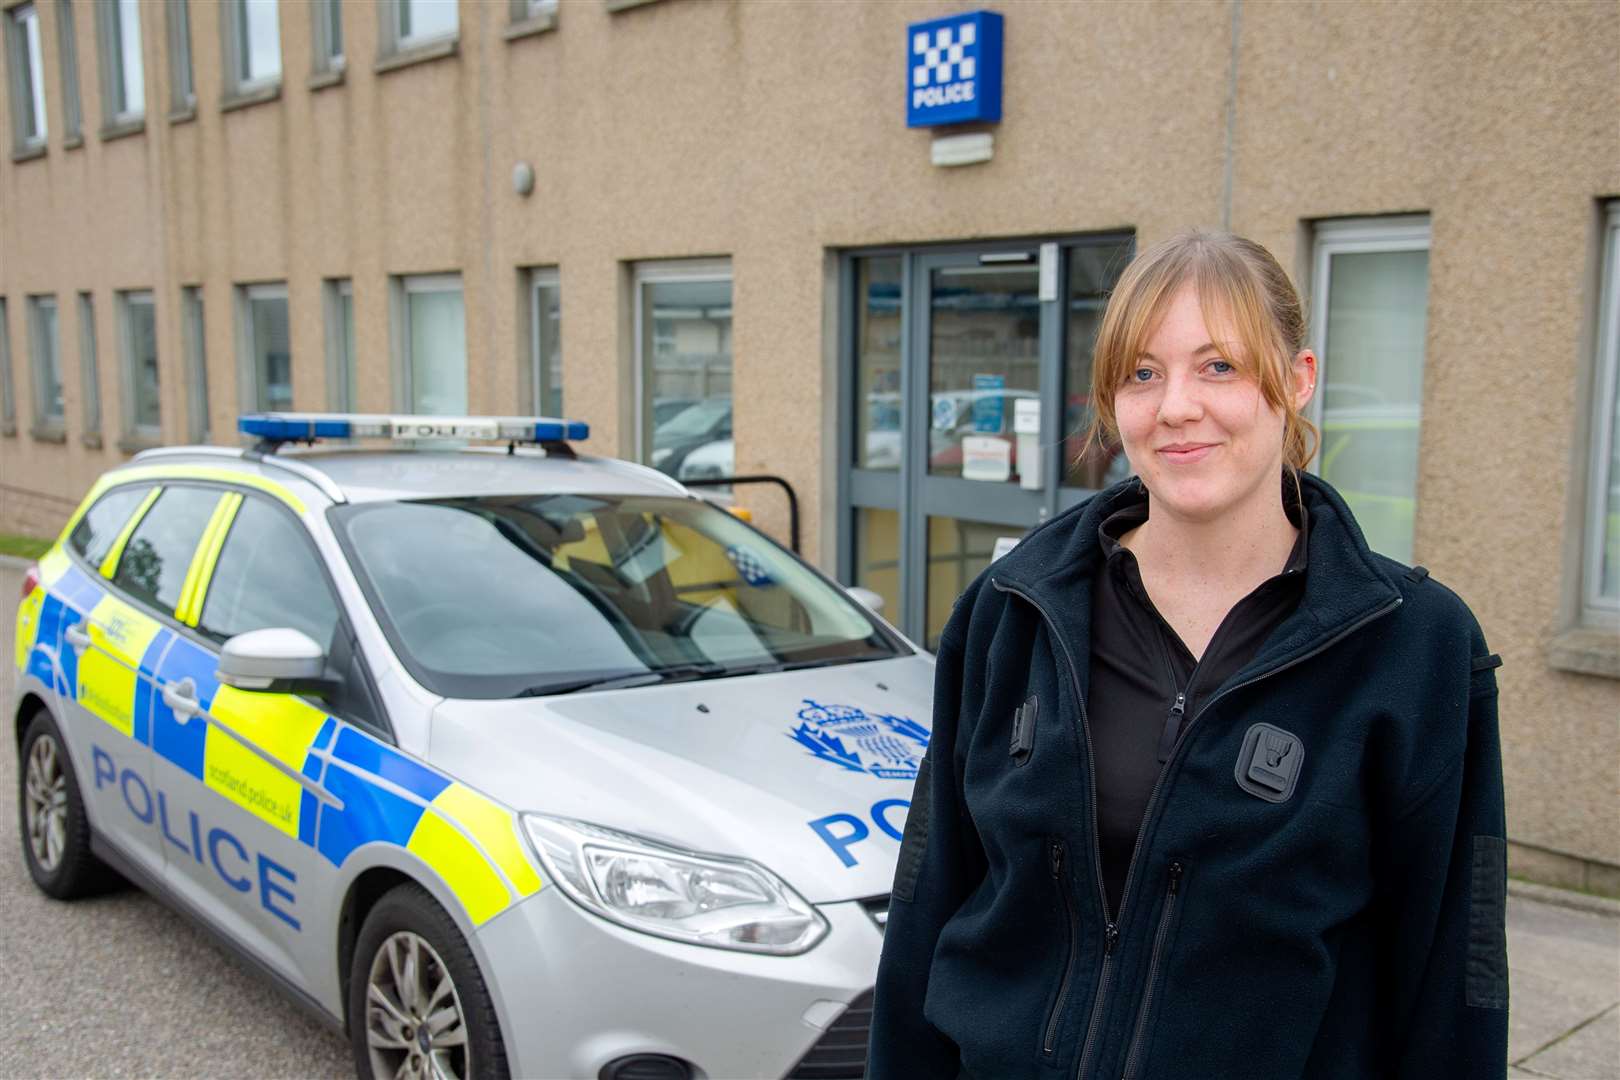 Buckie and Keith Community Officer PC Rachel Barclay. Picture: Daniel Forsyth